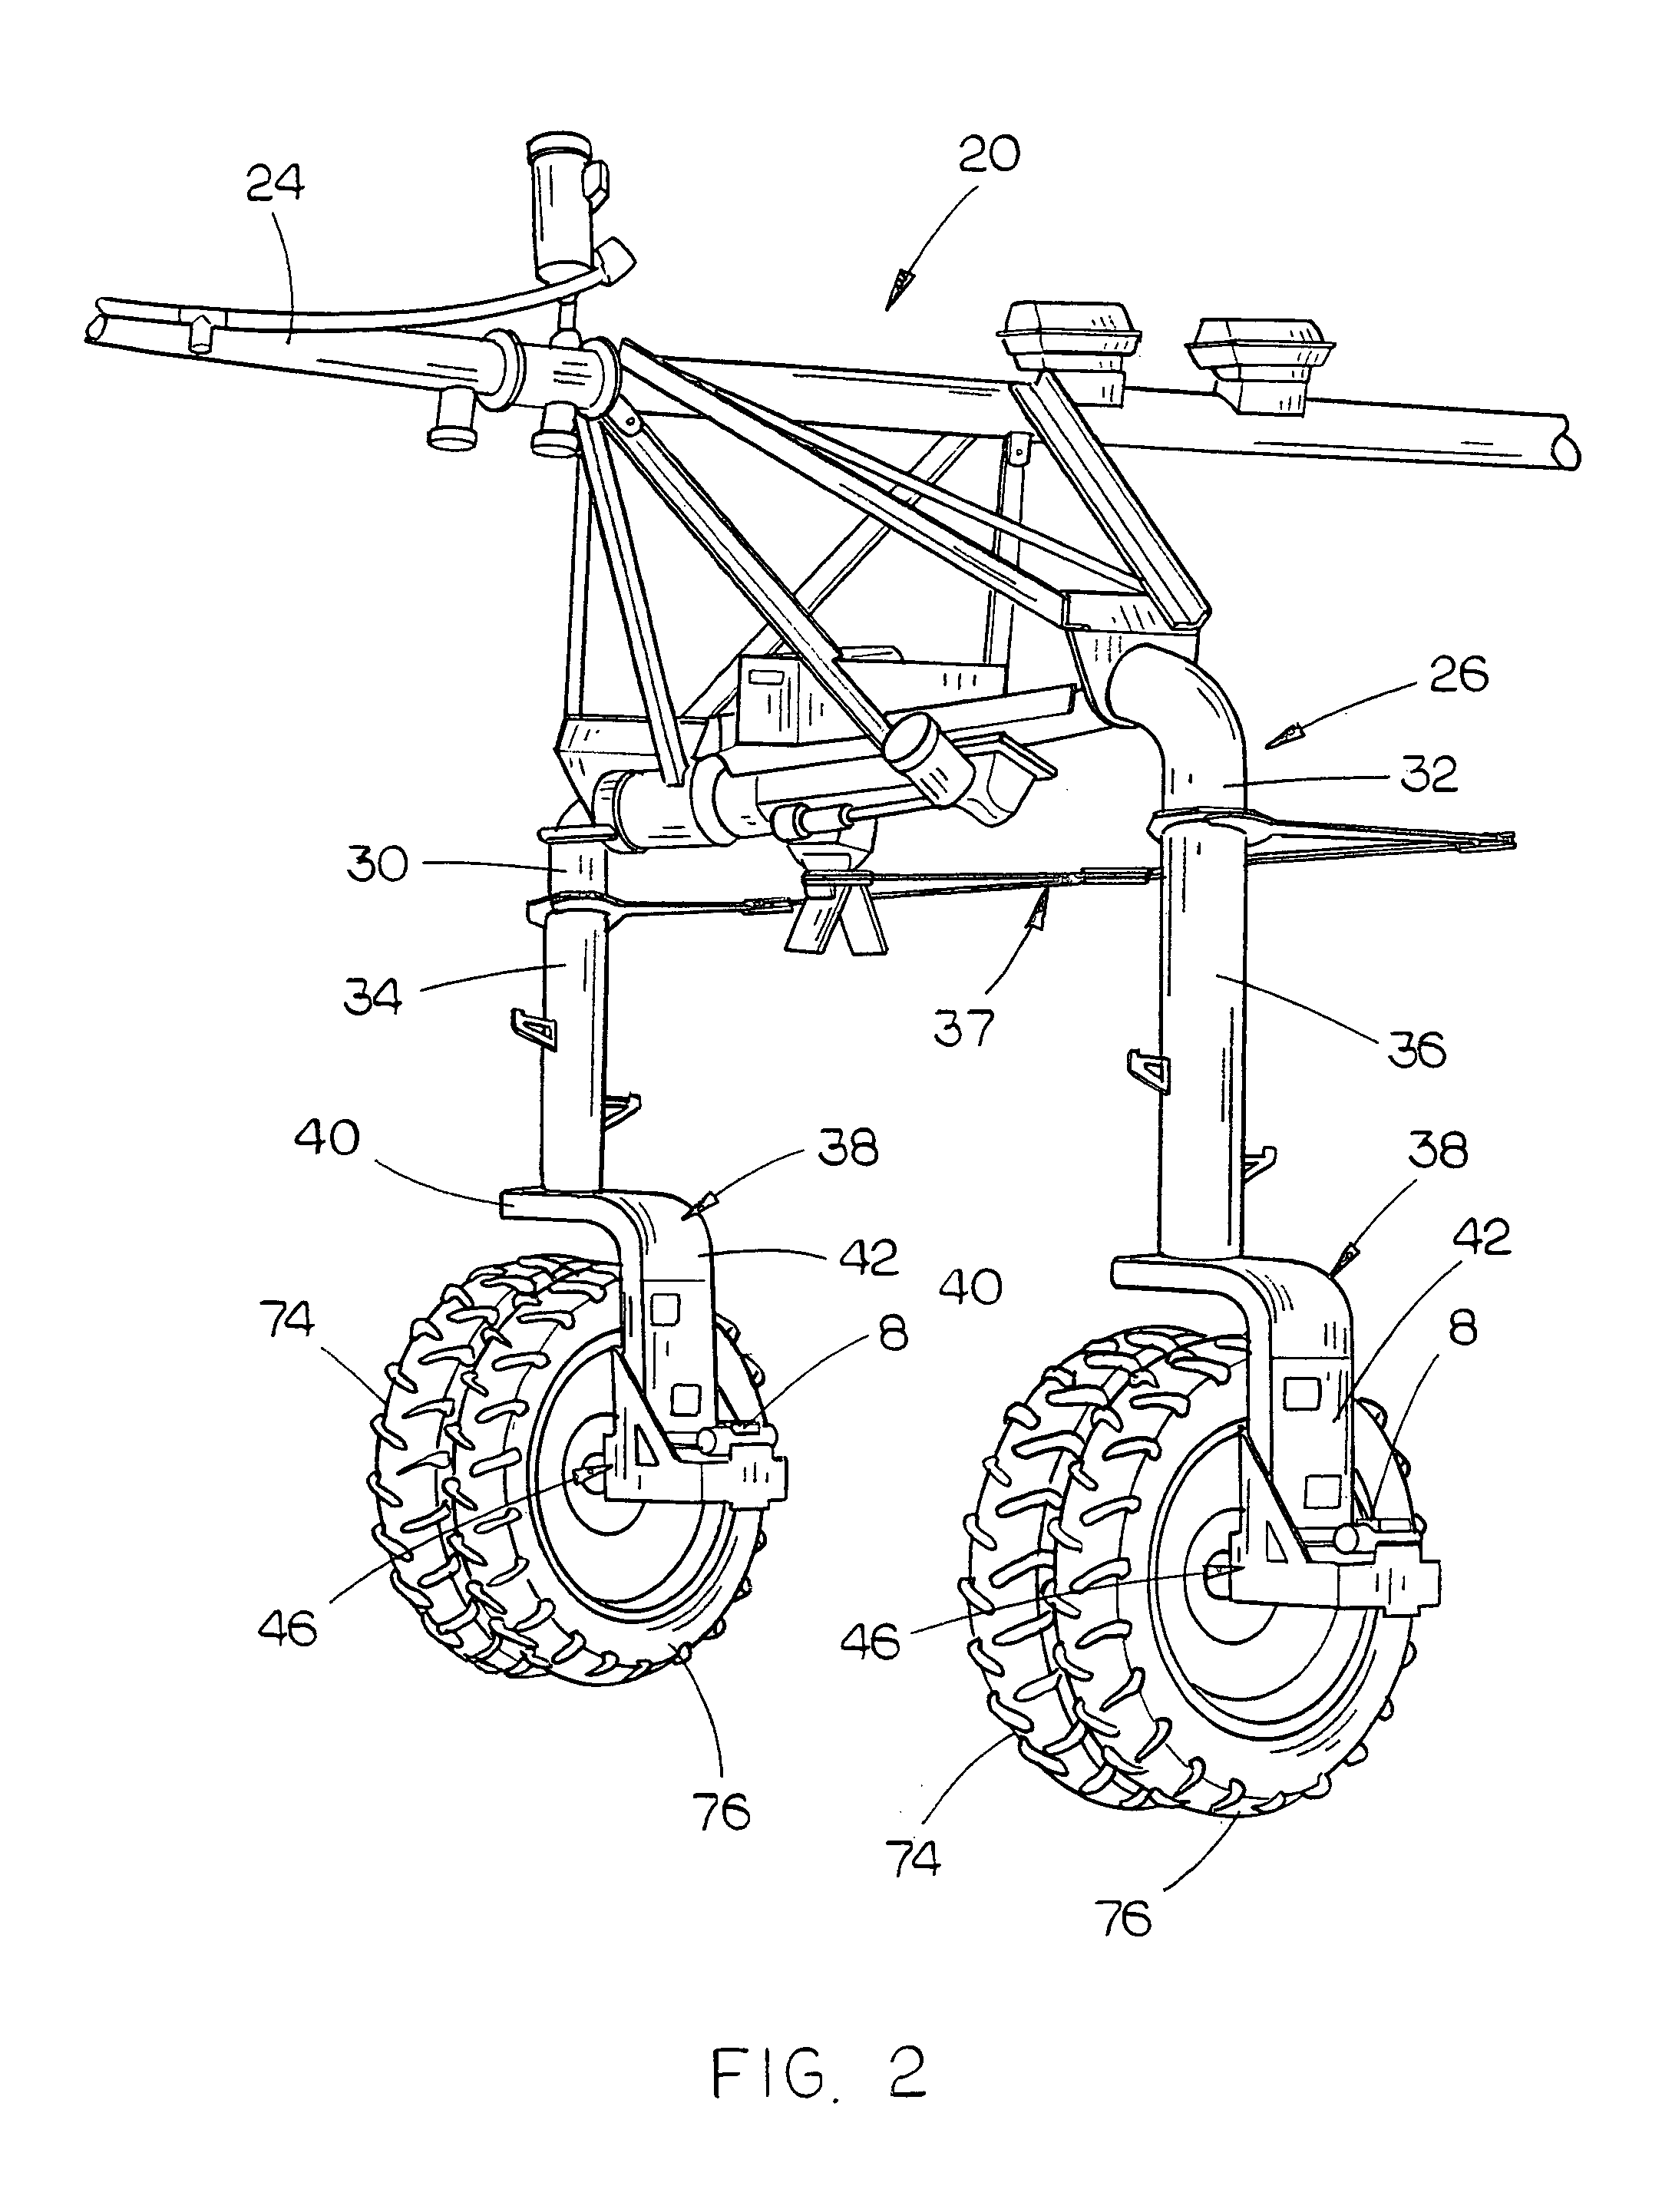 Flotation drive assembly for mechanized irrigation systems